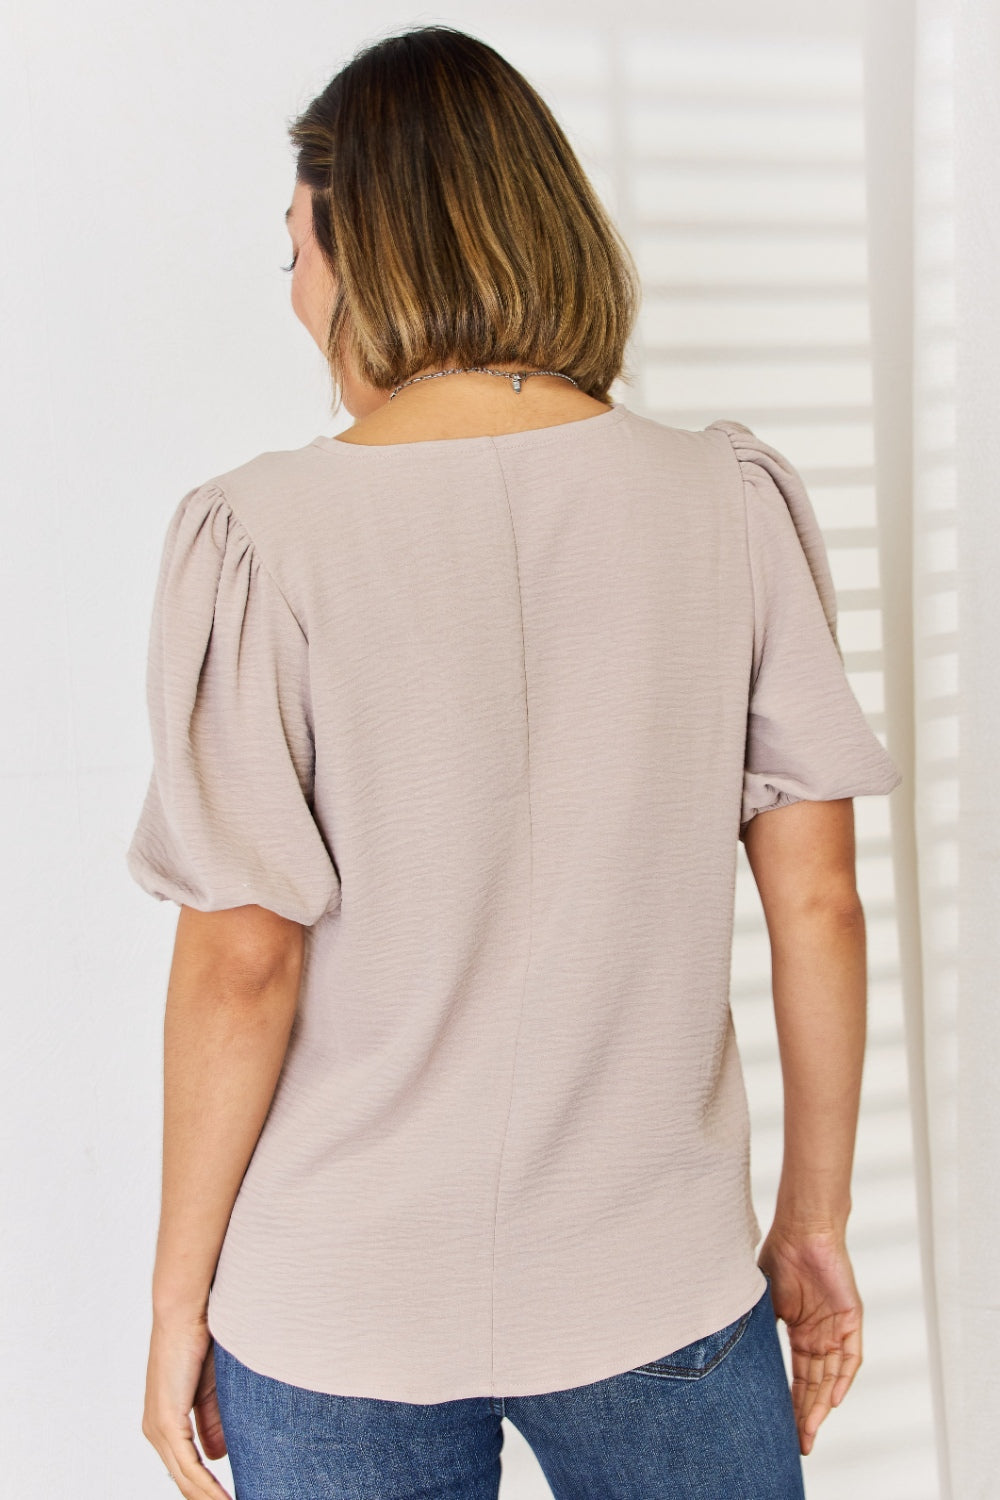 Woven Airflow V-Neck Puff Sleeve Top